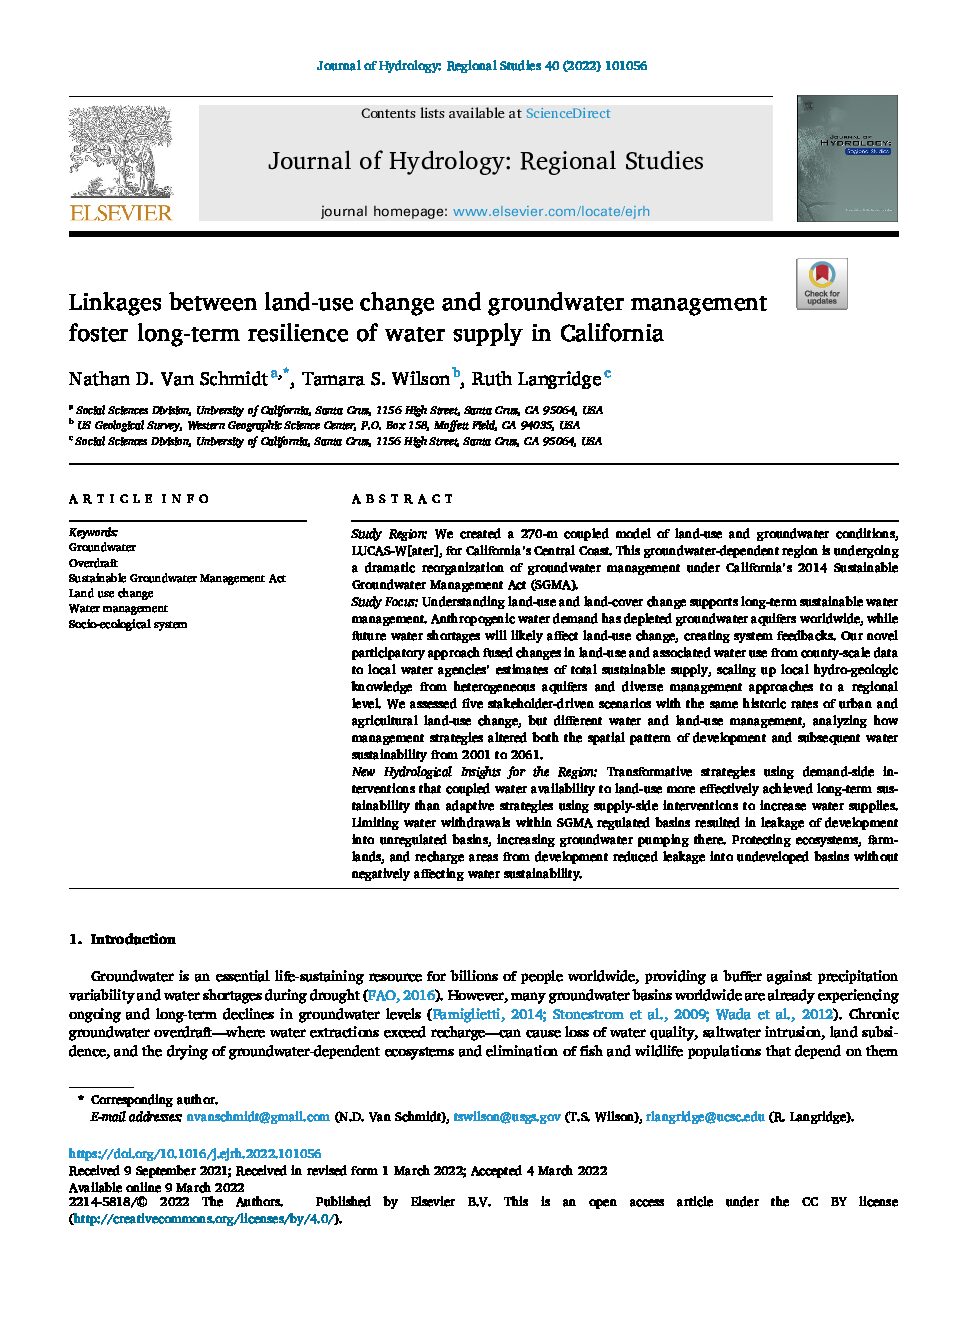 Linkages between land-use change and groundwater management foster long-term resilience of water supply in California